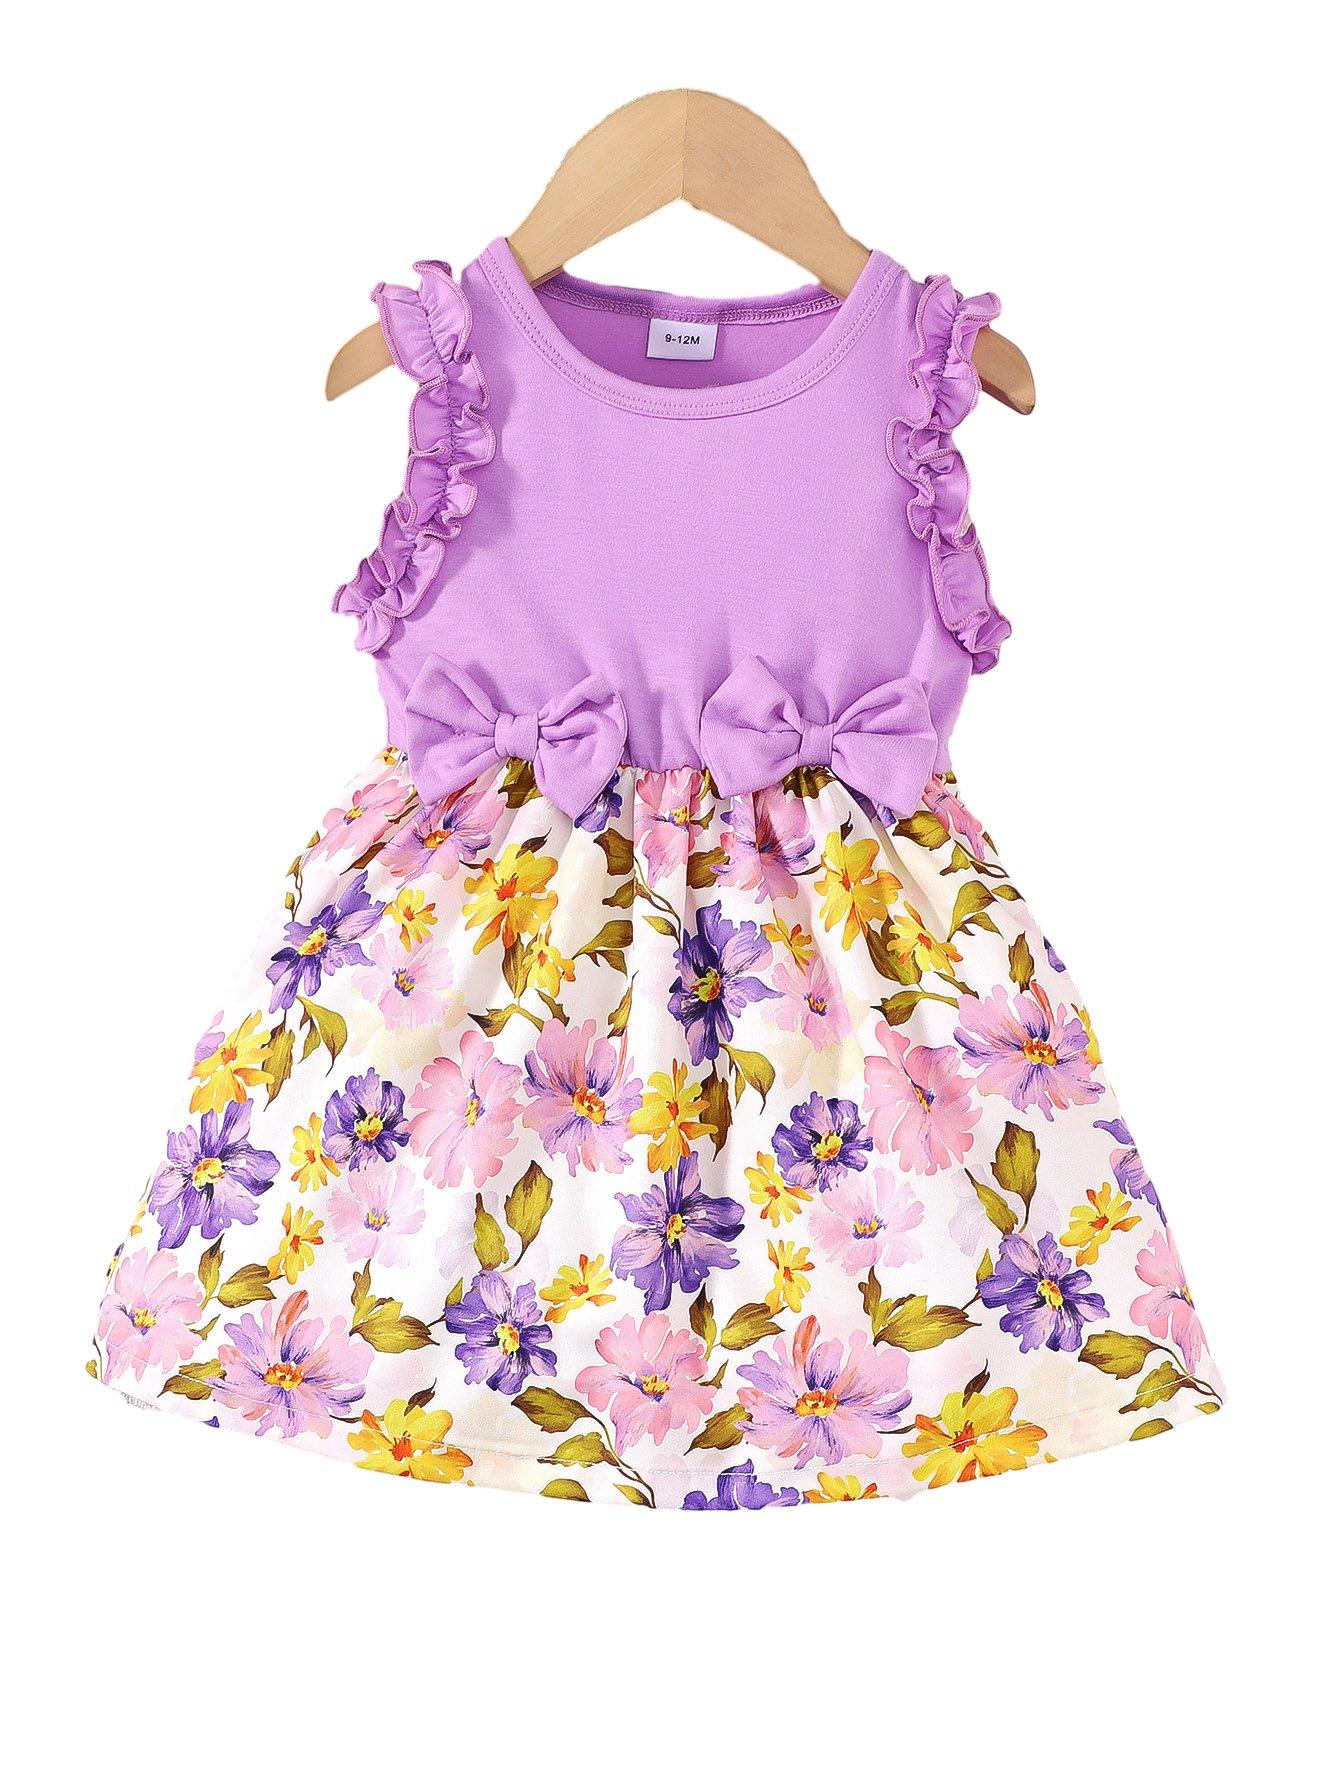 6M-3Y Ready Stock 6m-3y Baby Girls Dress Floral Print Bows Sleeveless Summer Toddler Girls Dress One Piece Casual Dress Purple Catpapa132312157-1